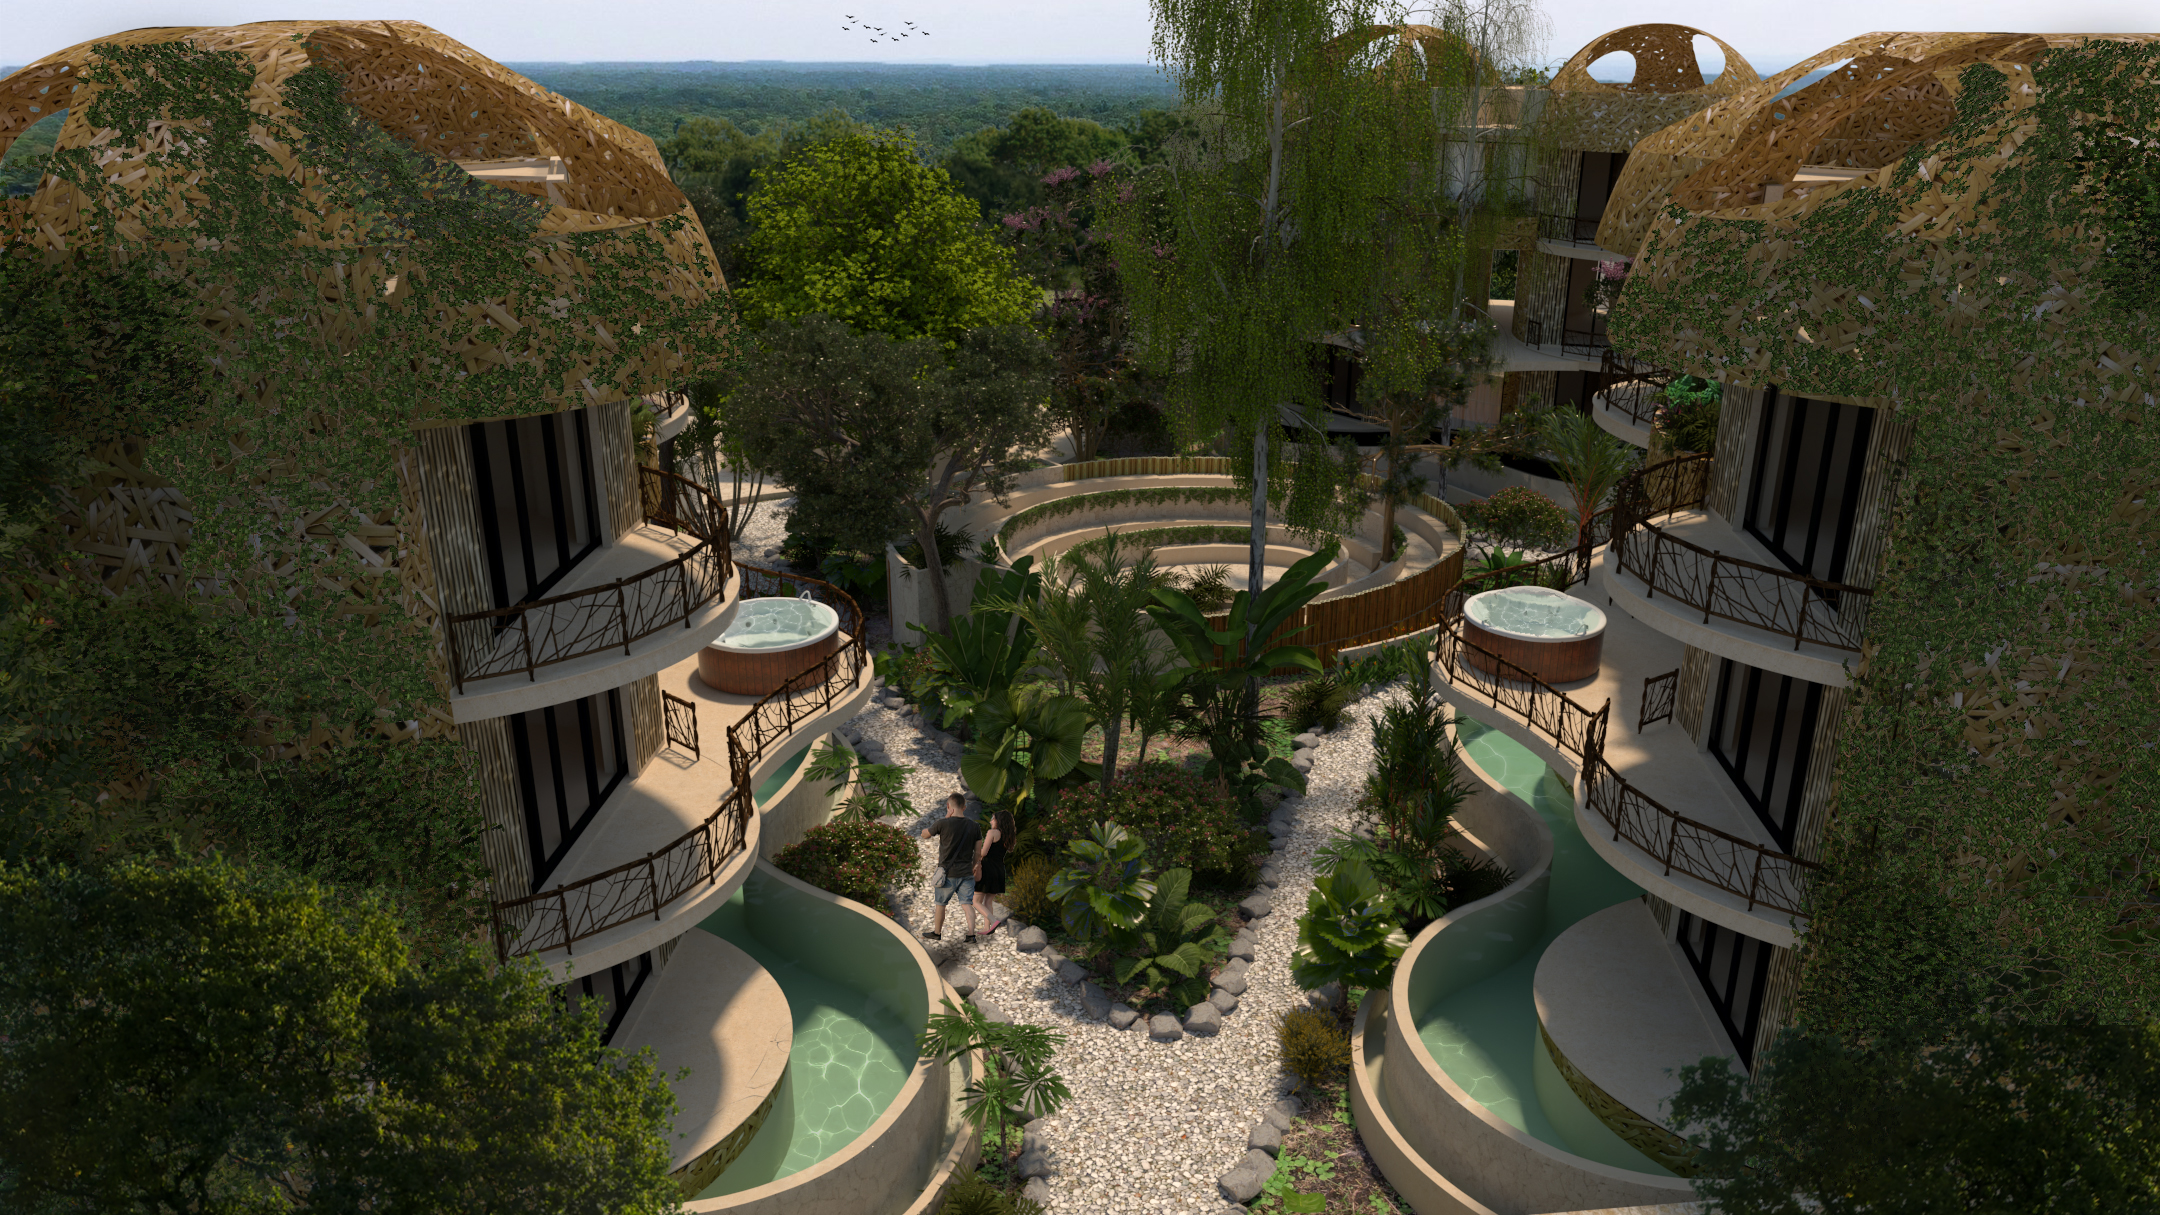 Sustainable projects in Tulum ideal for investment or living.